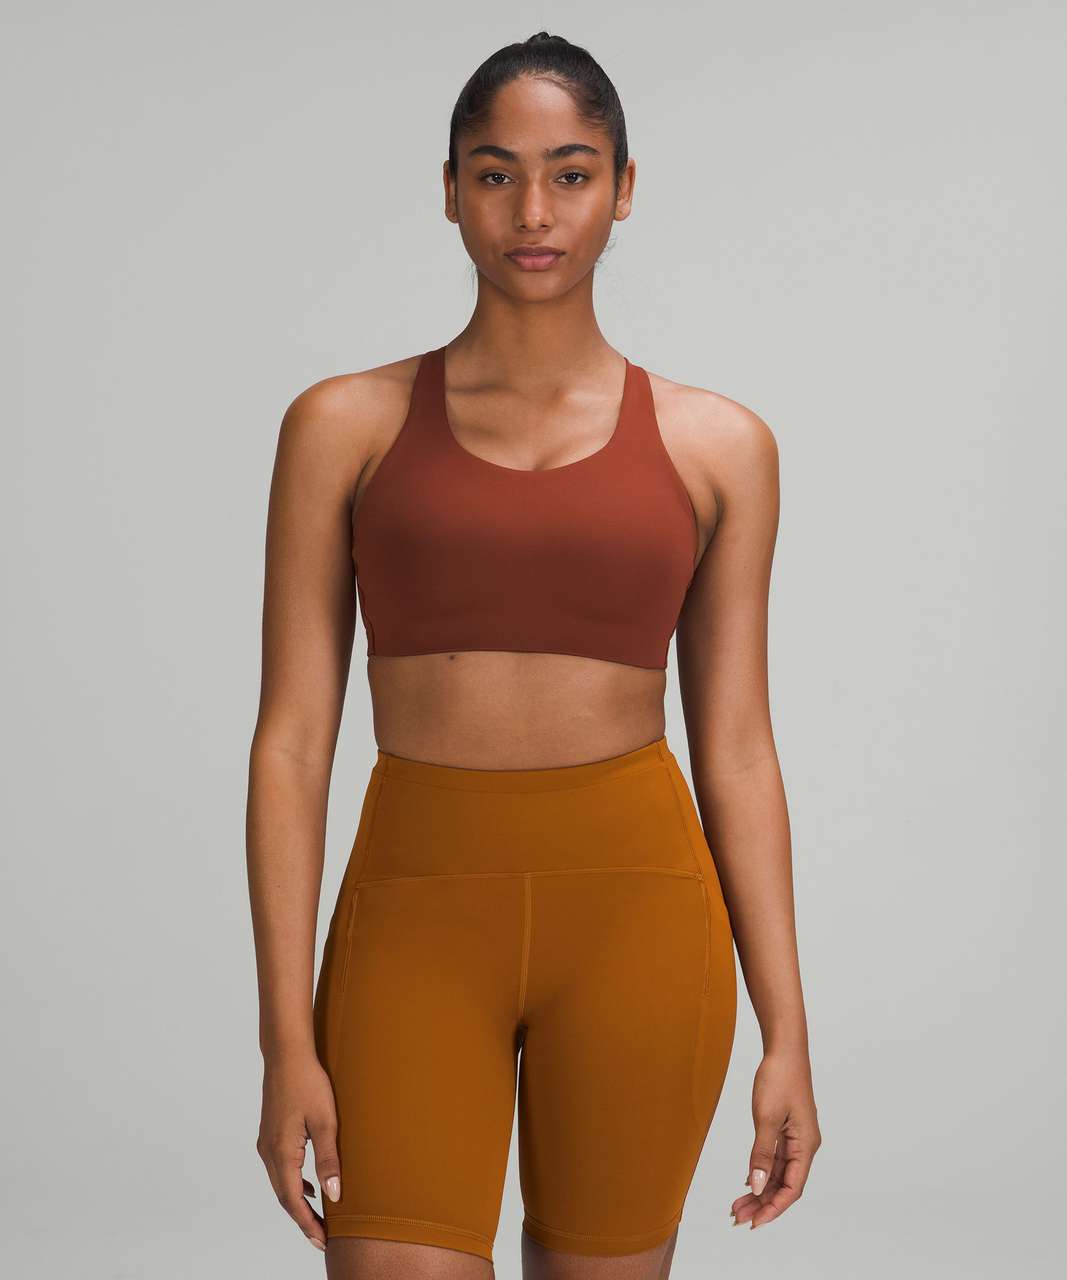 Lululemon Energy Bra High Support Size undefined - $45 - From